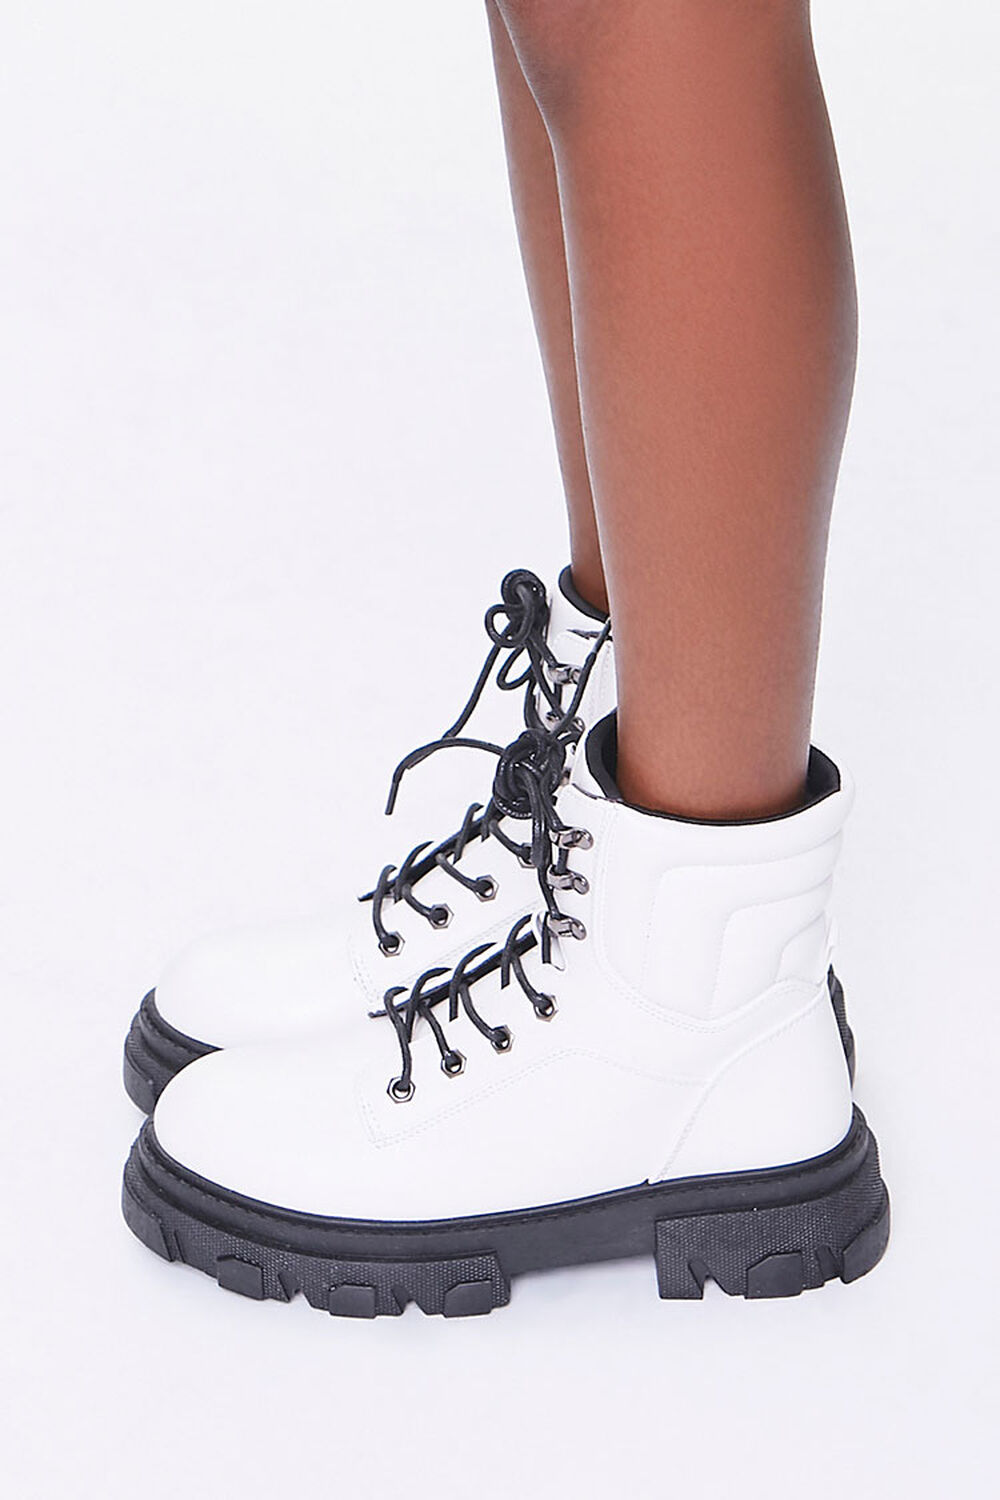 WHITE Quilted Platform Ankle Booties, image 2